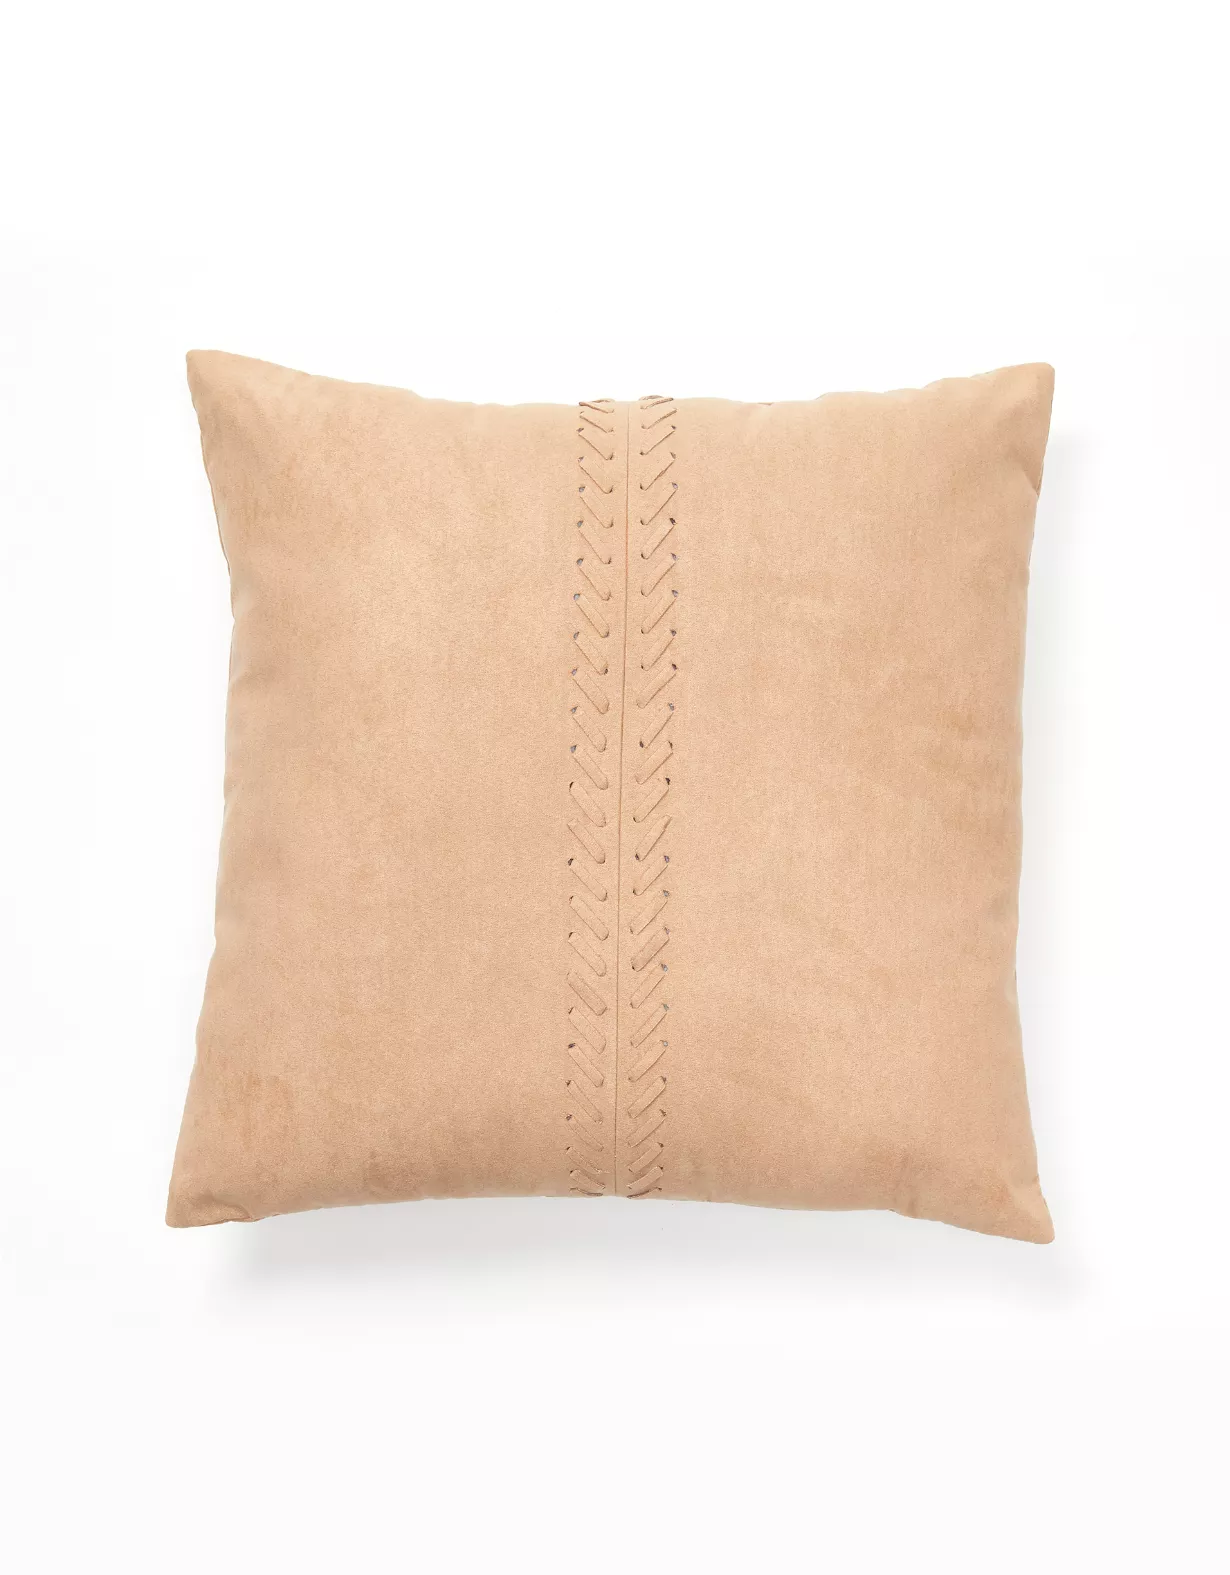 Dormify Stitched Suede Pillow